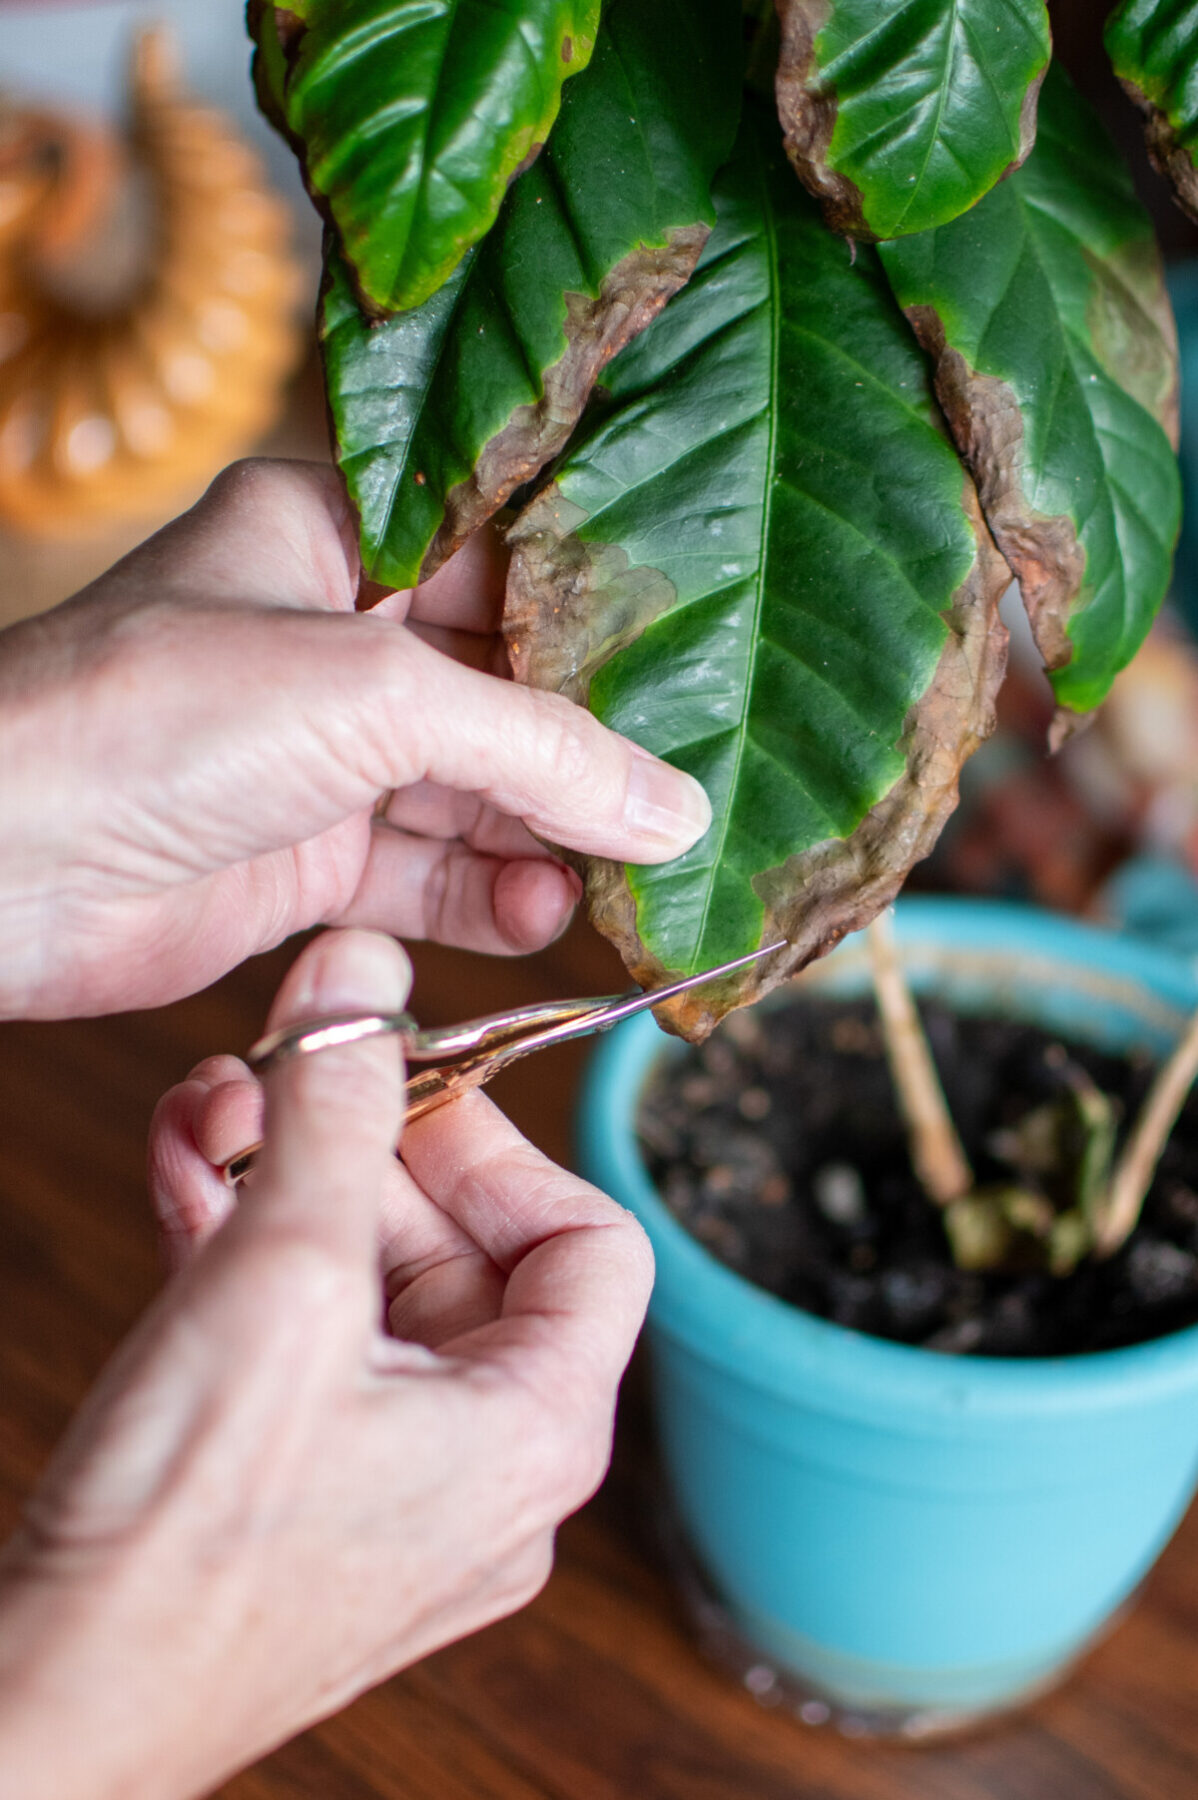 Woman's hand using scissors to trim off dead part of plant leaves.